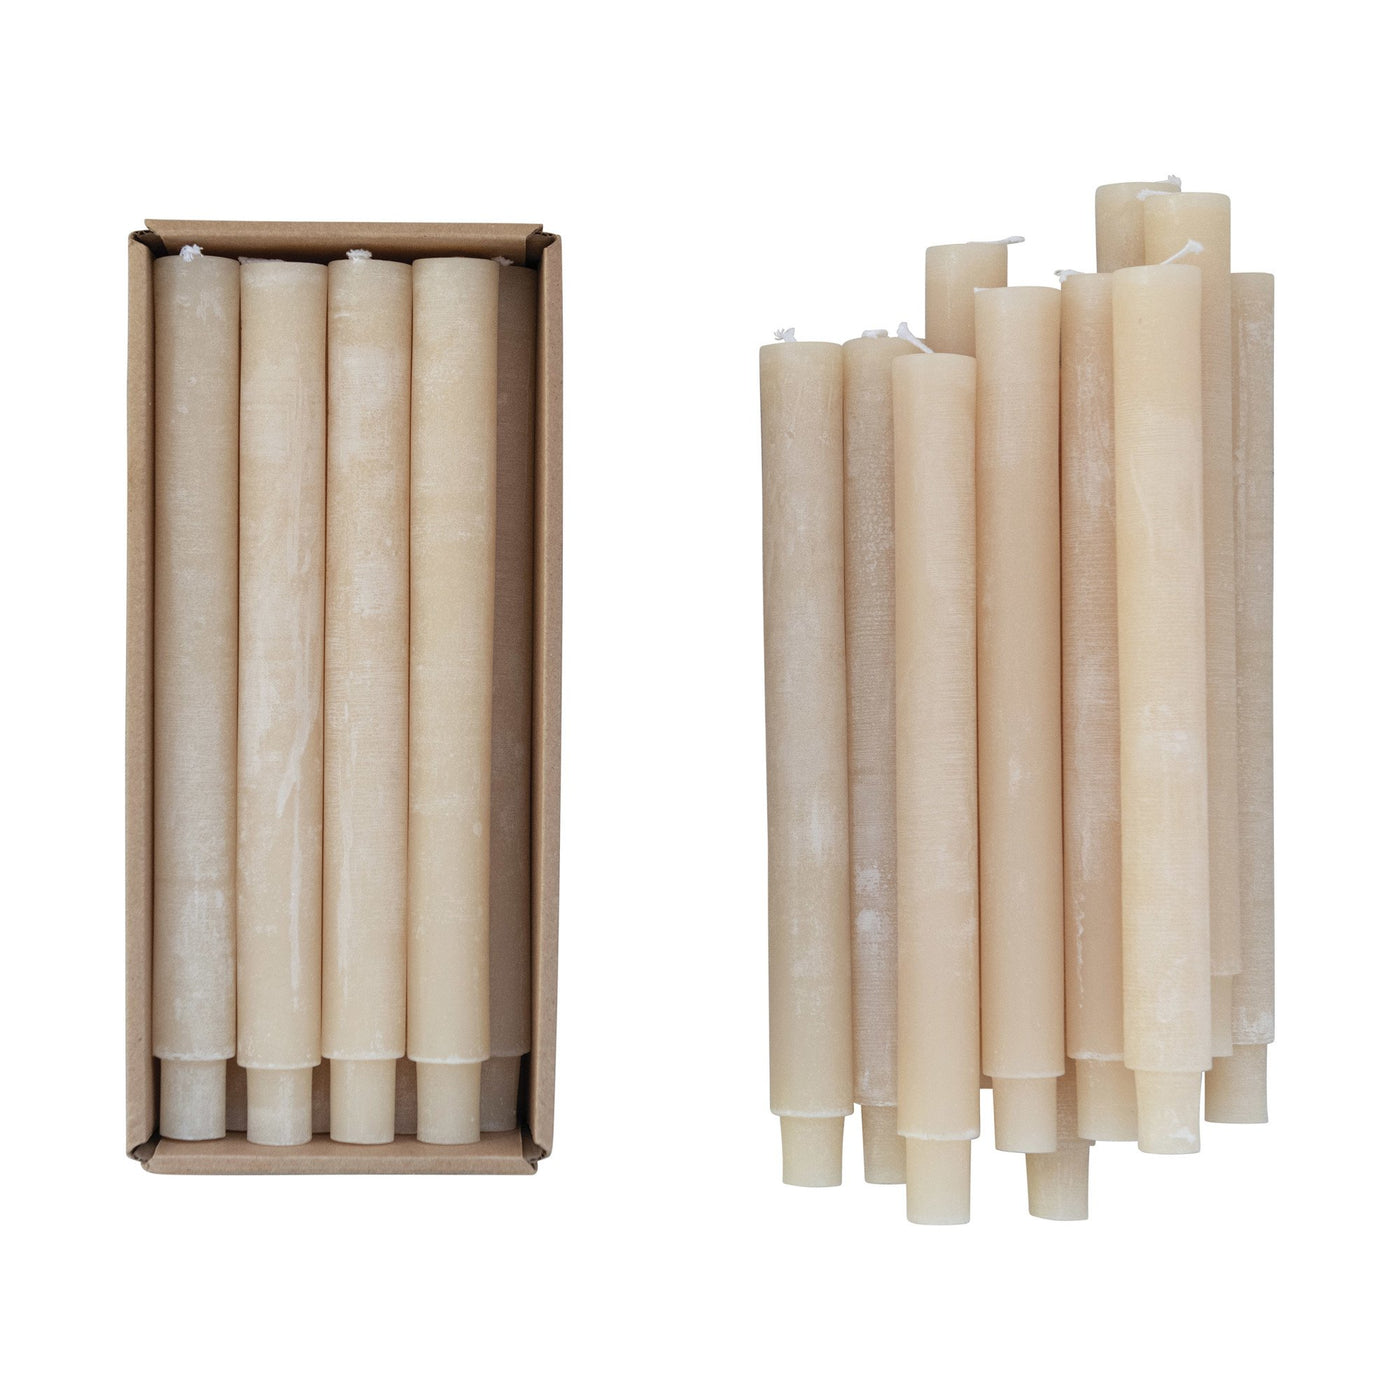 10"H Unscented Taper Candles in Box